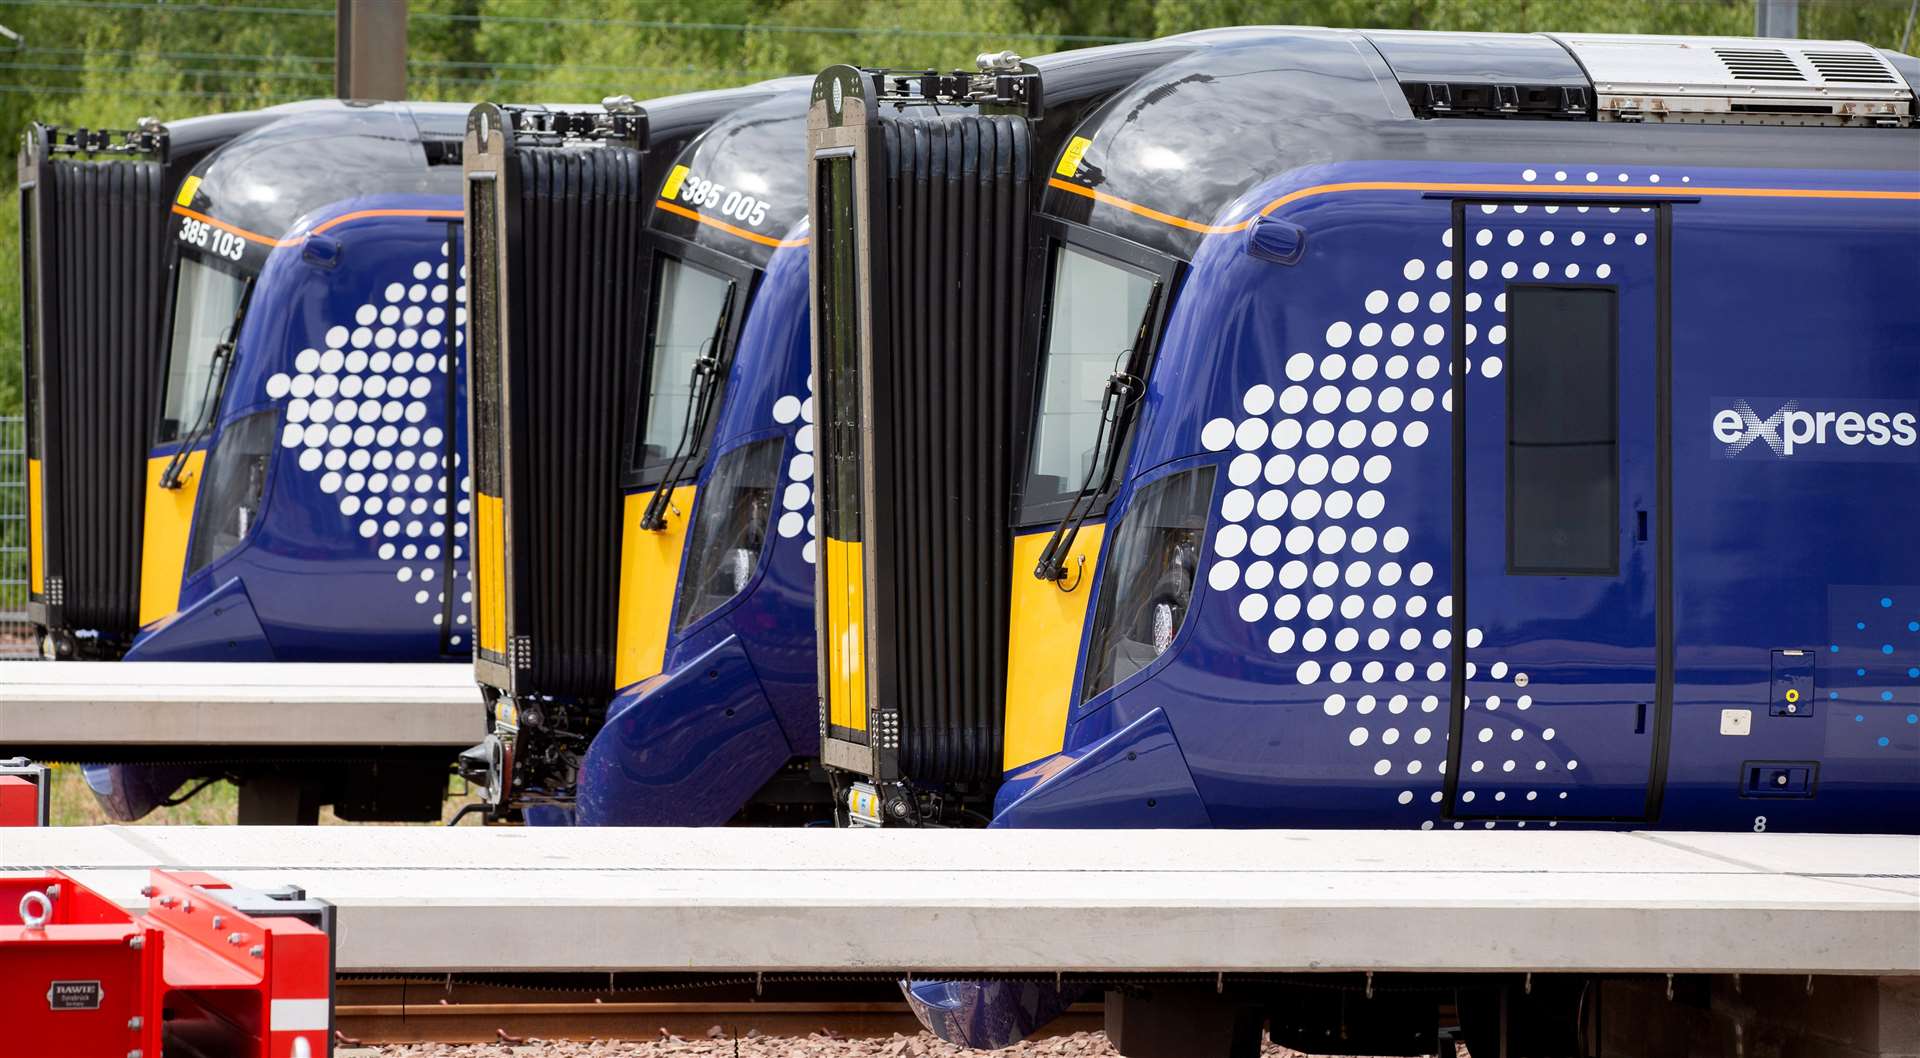 Expressing it: times have been cut says ScotRail